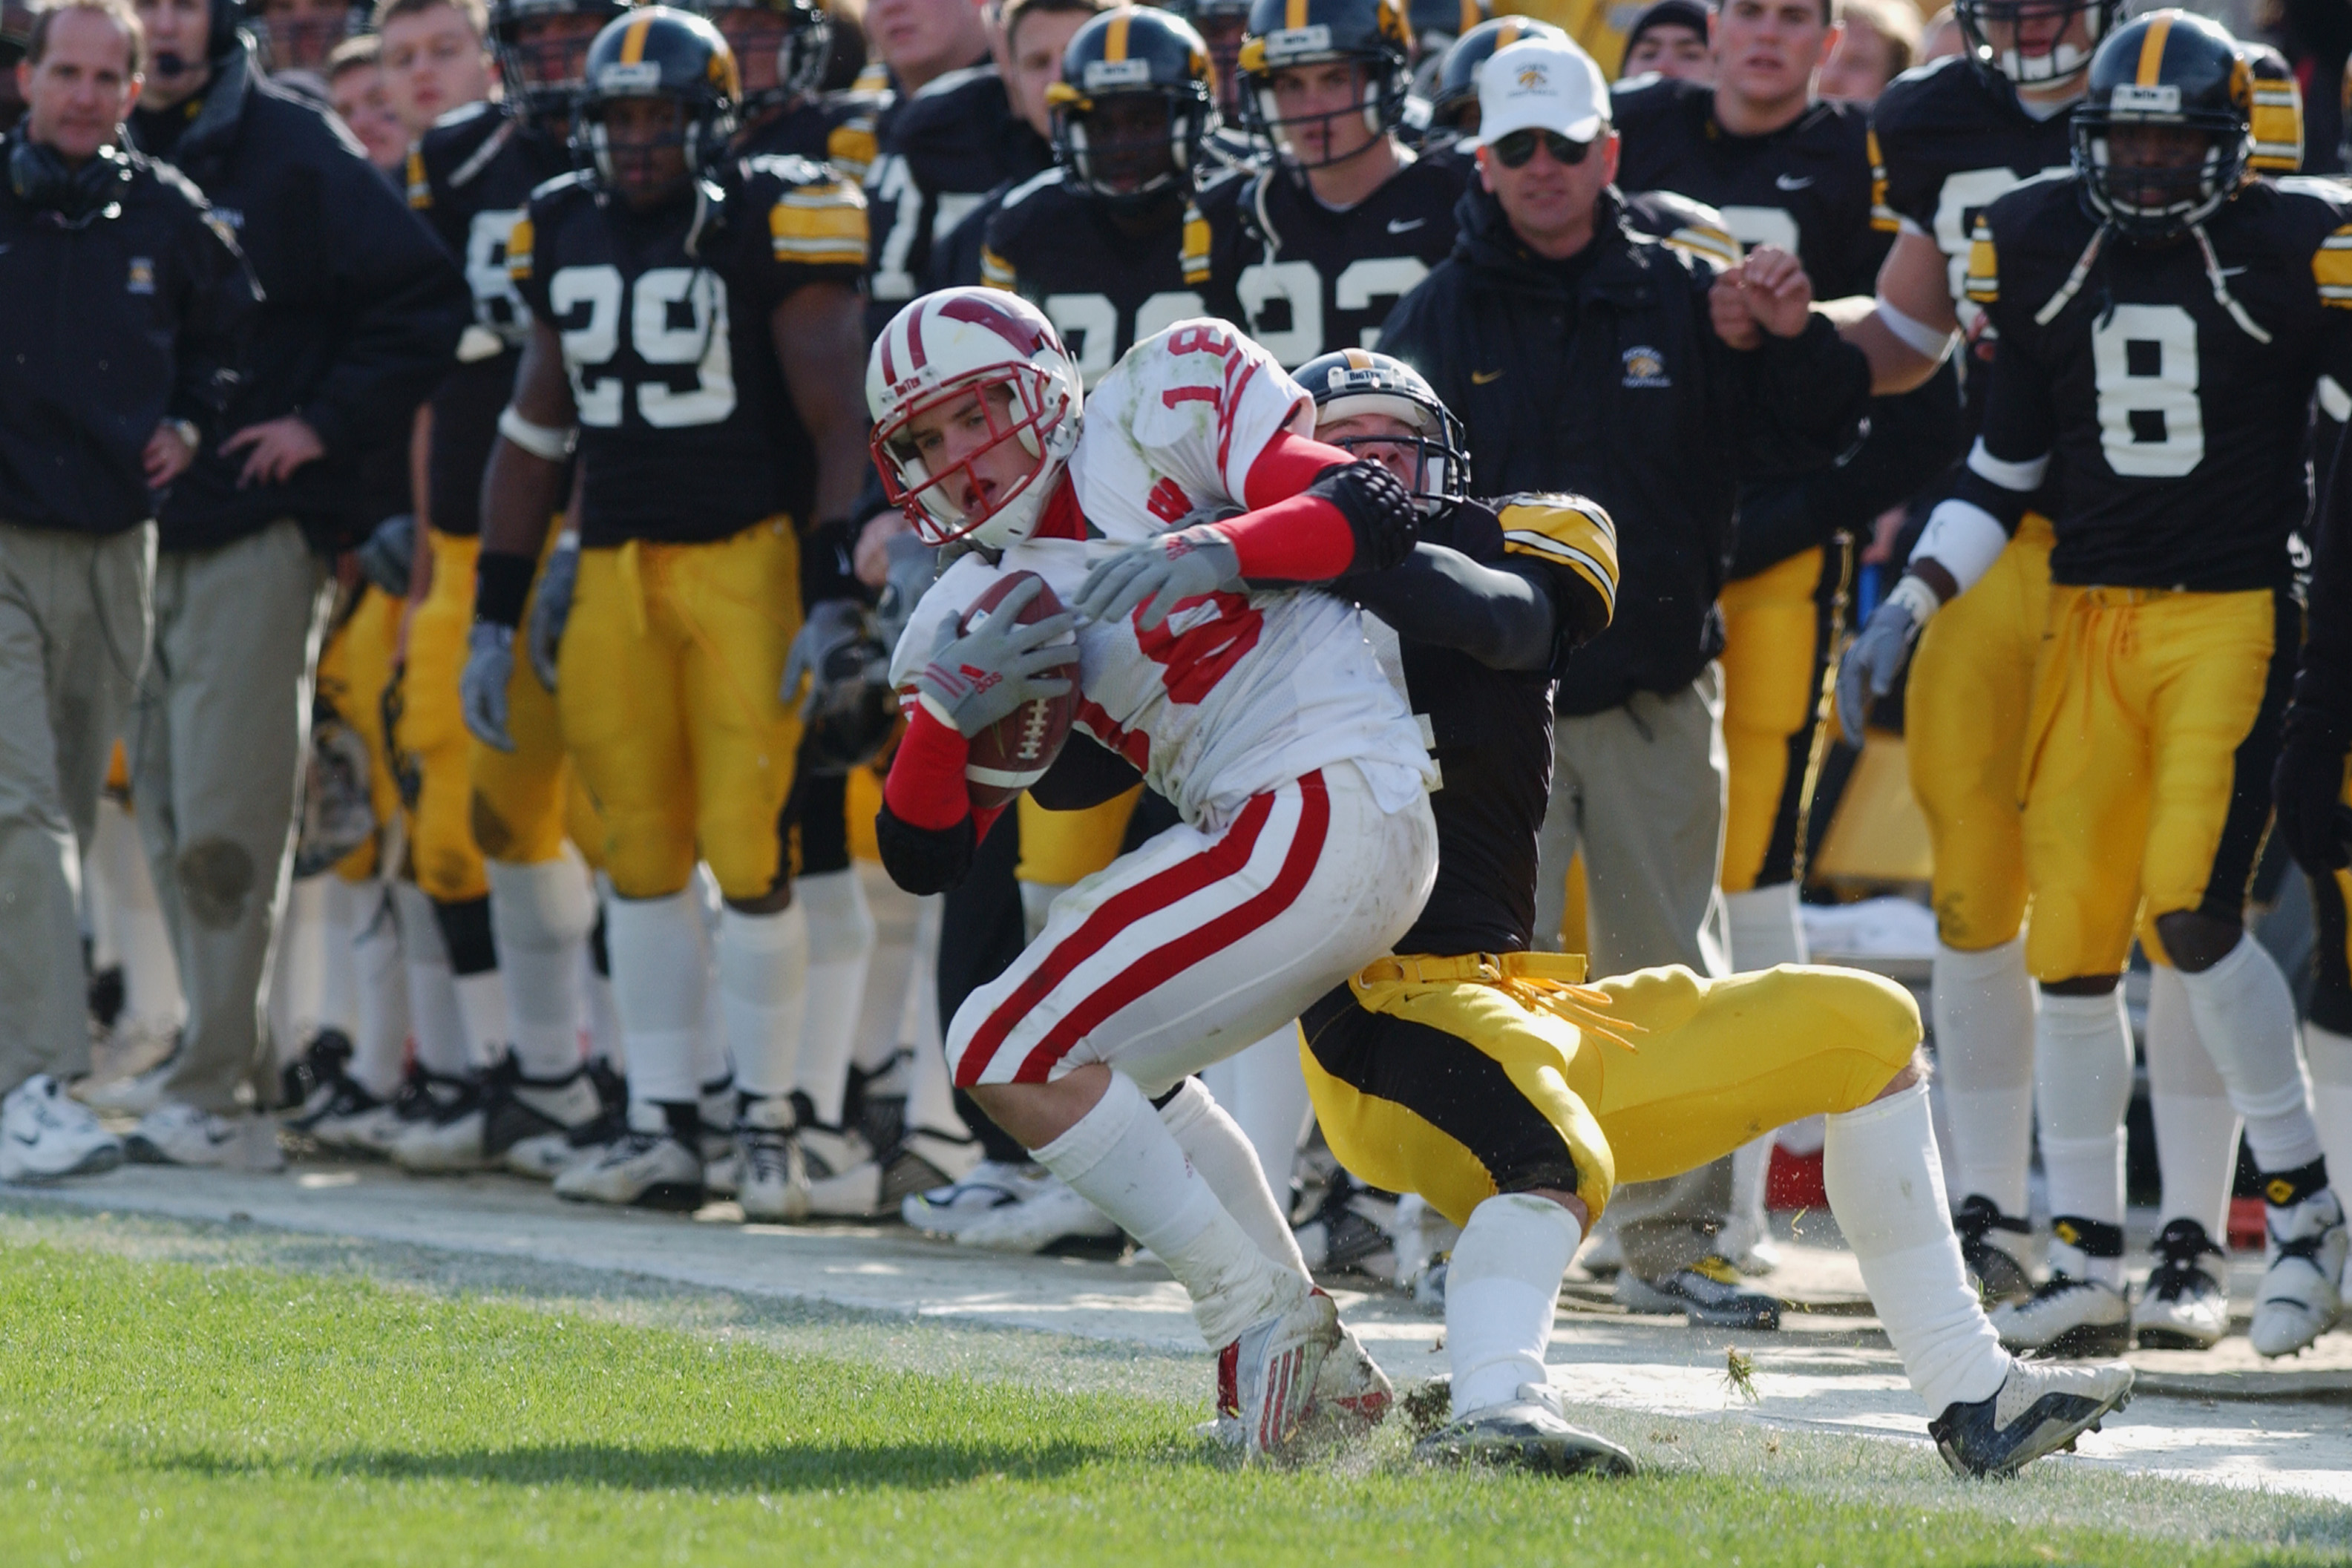 IOWA CITY, IA - NOVEMBER 2:  Jim Leonhard #18 of the Wisconsin Badgers is thrown out of bounds by Scott Boleyn #4 of the Iowa Hawkeyes during the game on November 2, 2002 at Kinnick Stadium in Iowa City, Iowa.  (Photo by Matthew Stockman/Getty Images)